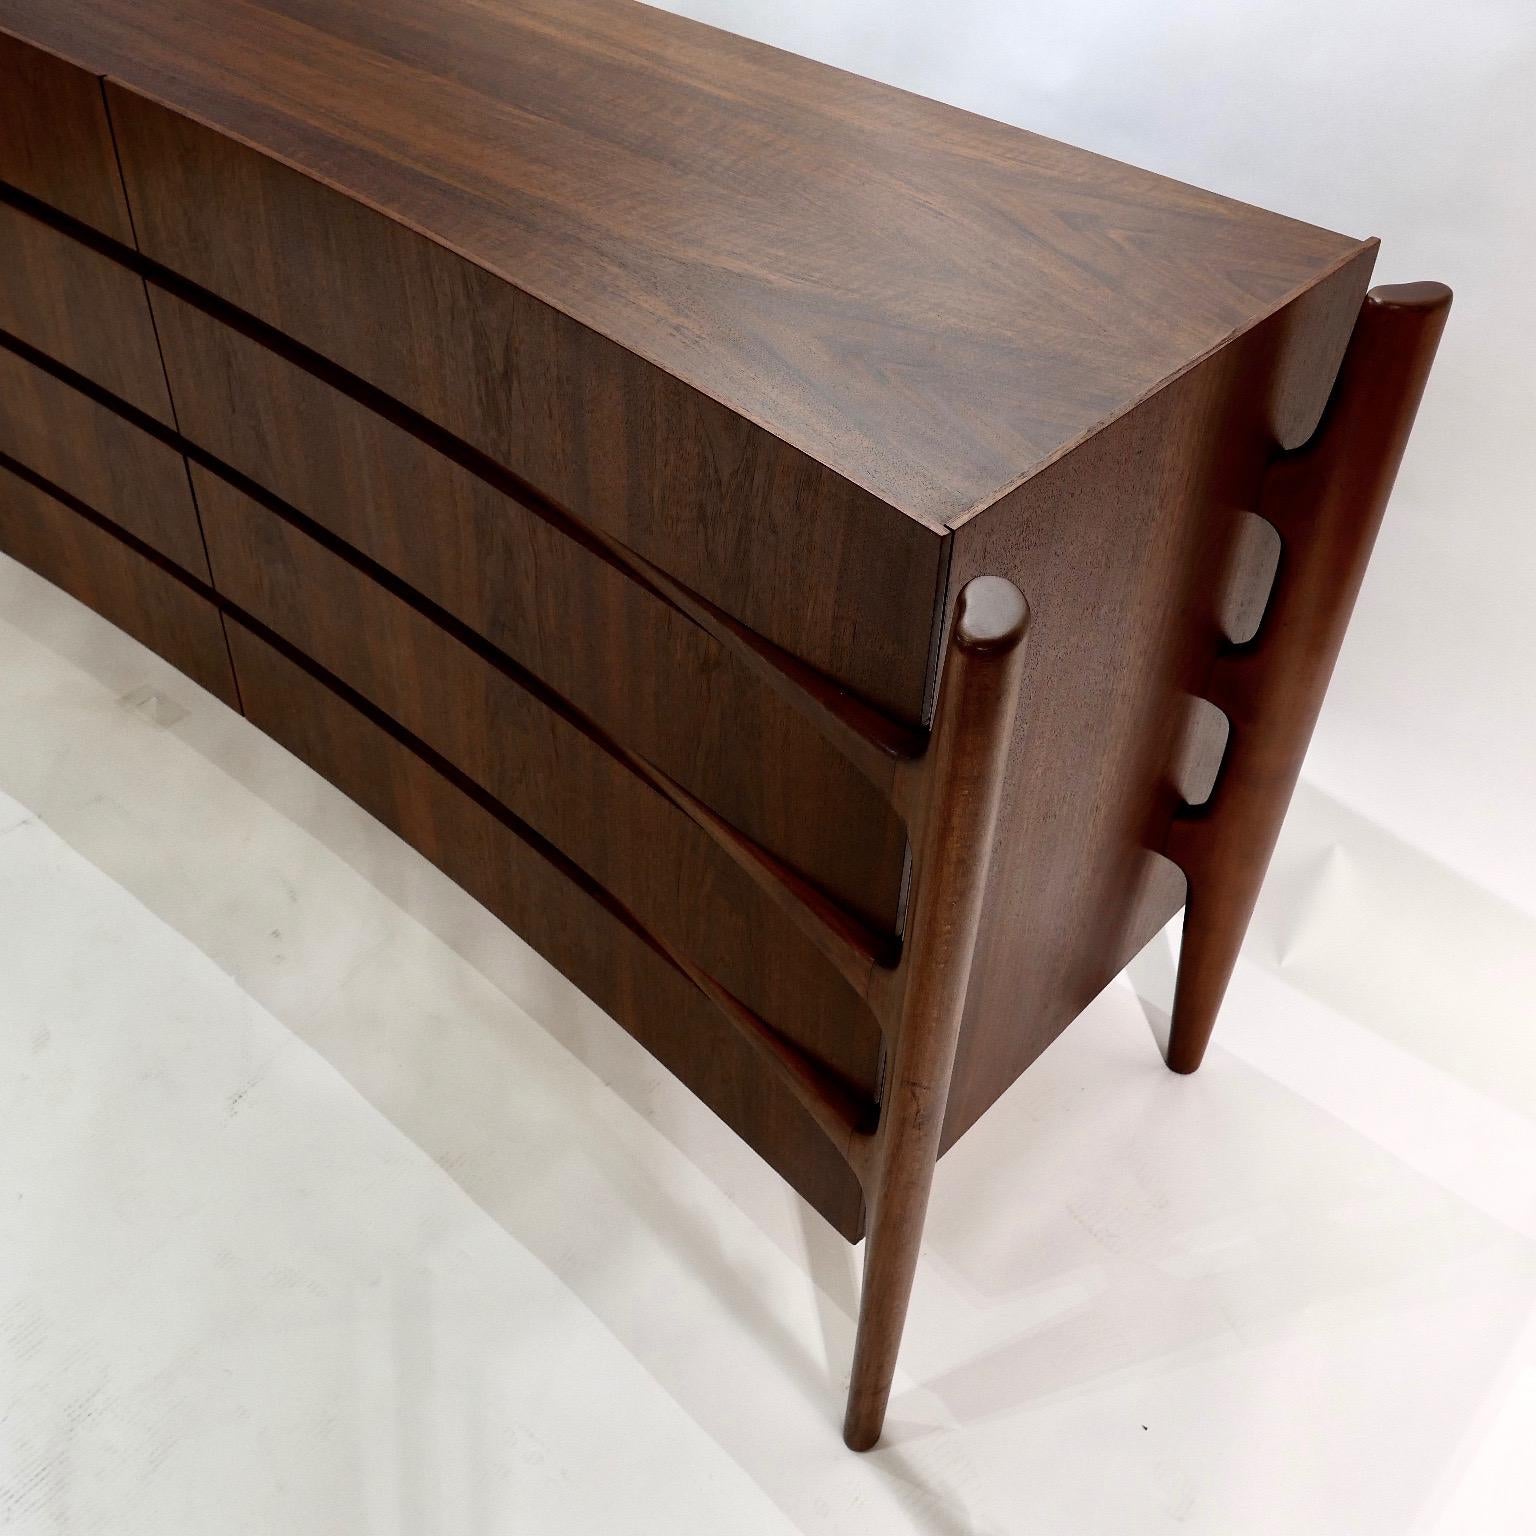 Exposed carved walnut legs with a curved bookmatched walnut front. Beautiful and sculptural eight drawer dresser designed by William Hinn for Urban Furniture's 